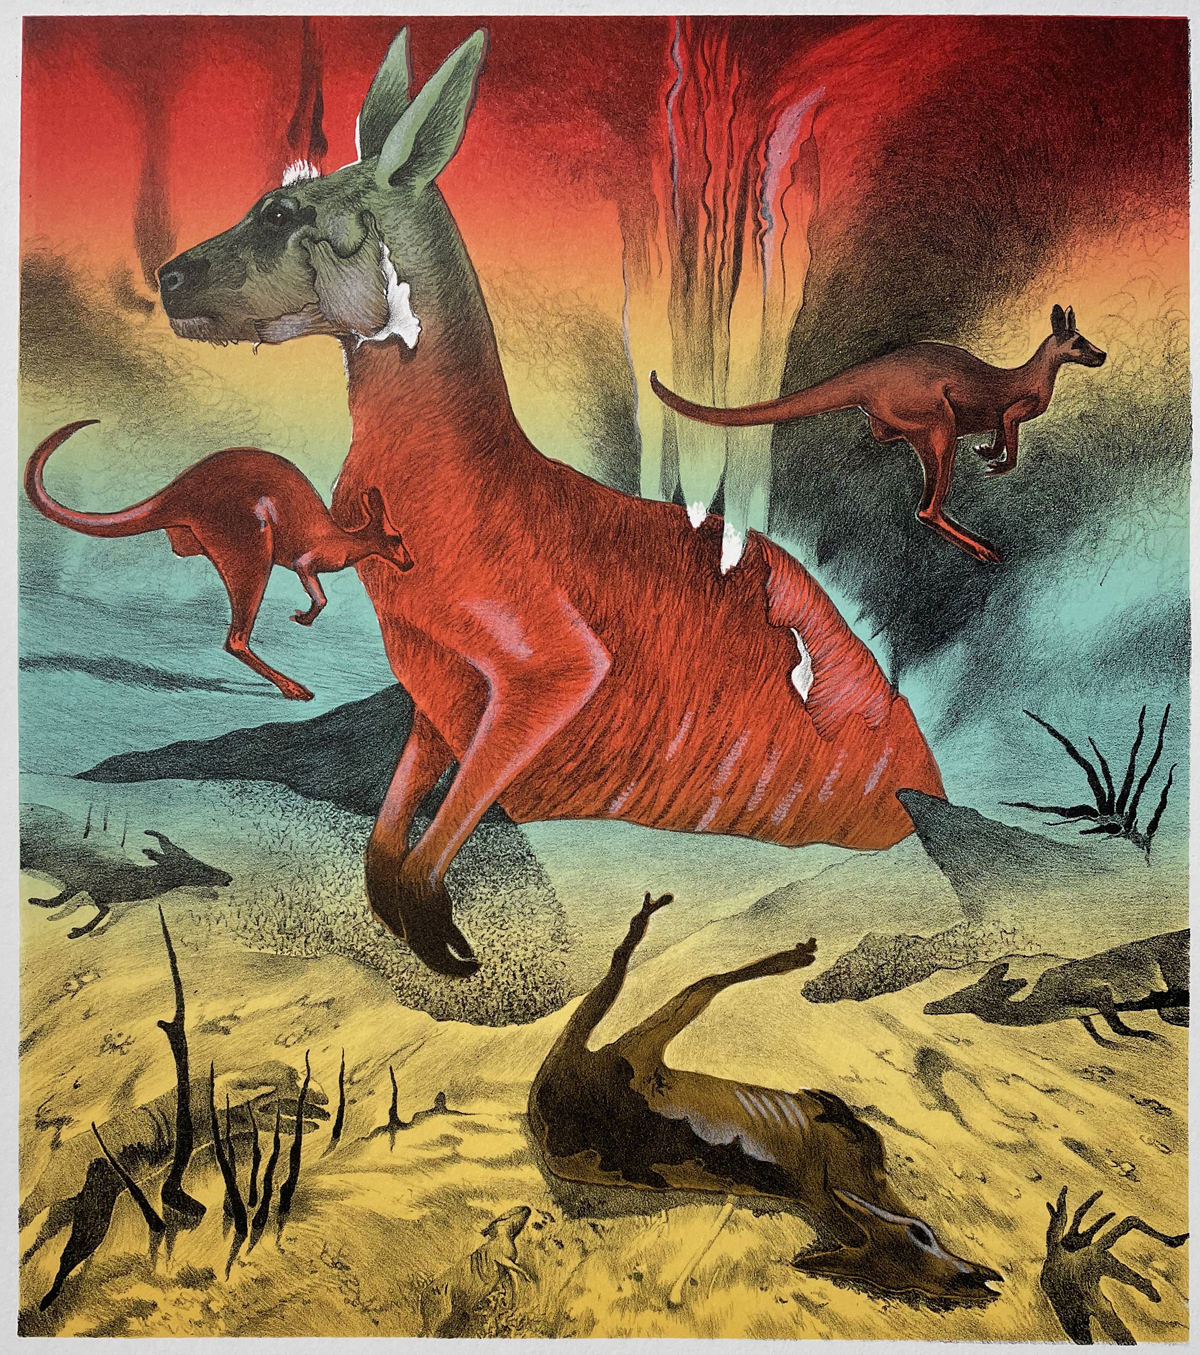 Imagery of red kangaroos, carcasses, and a fiery landscape imply the wildfires that ravaged Australia